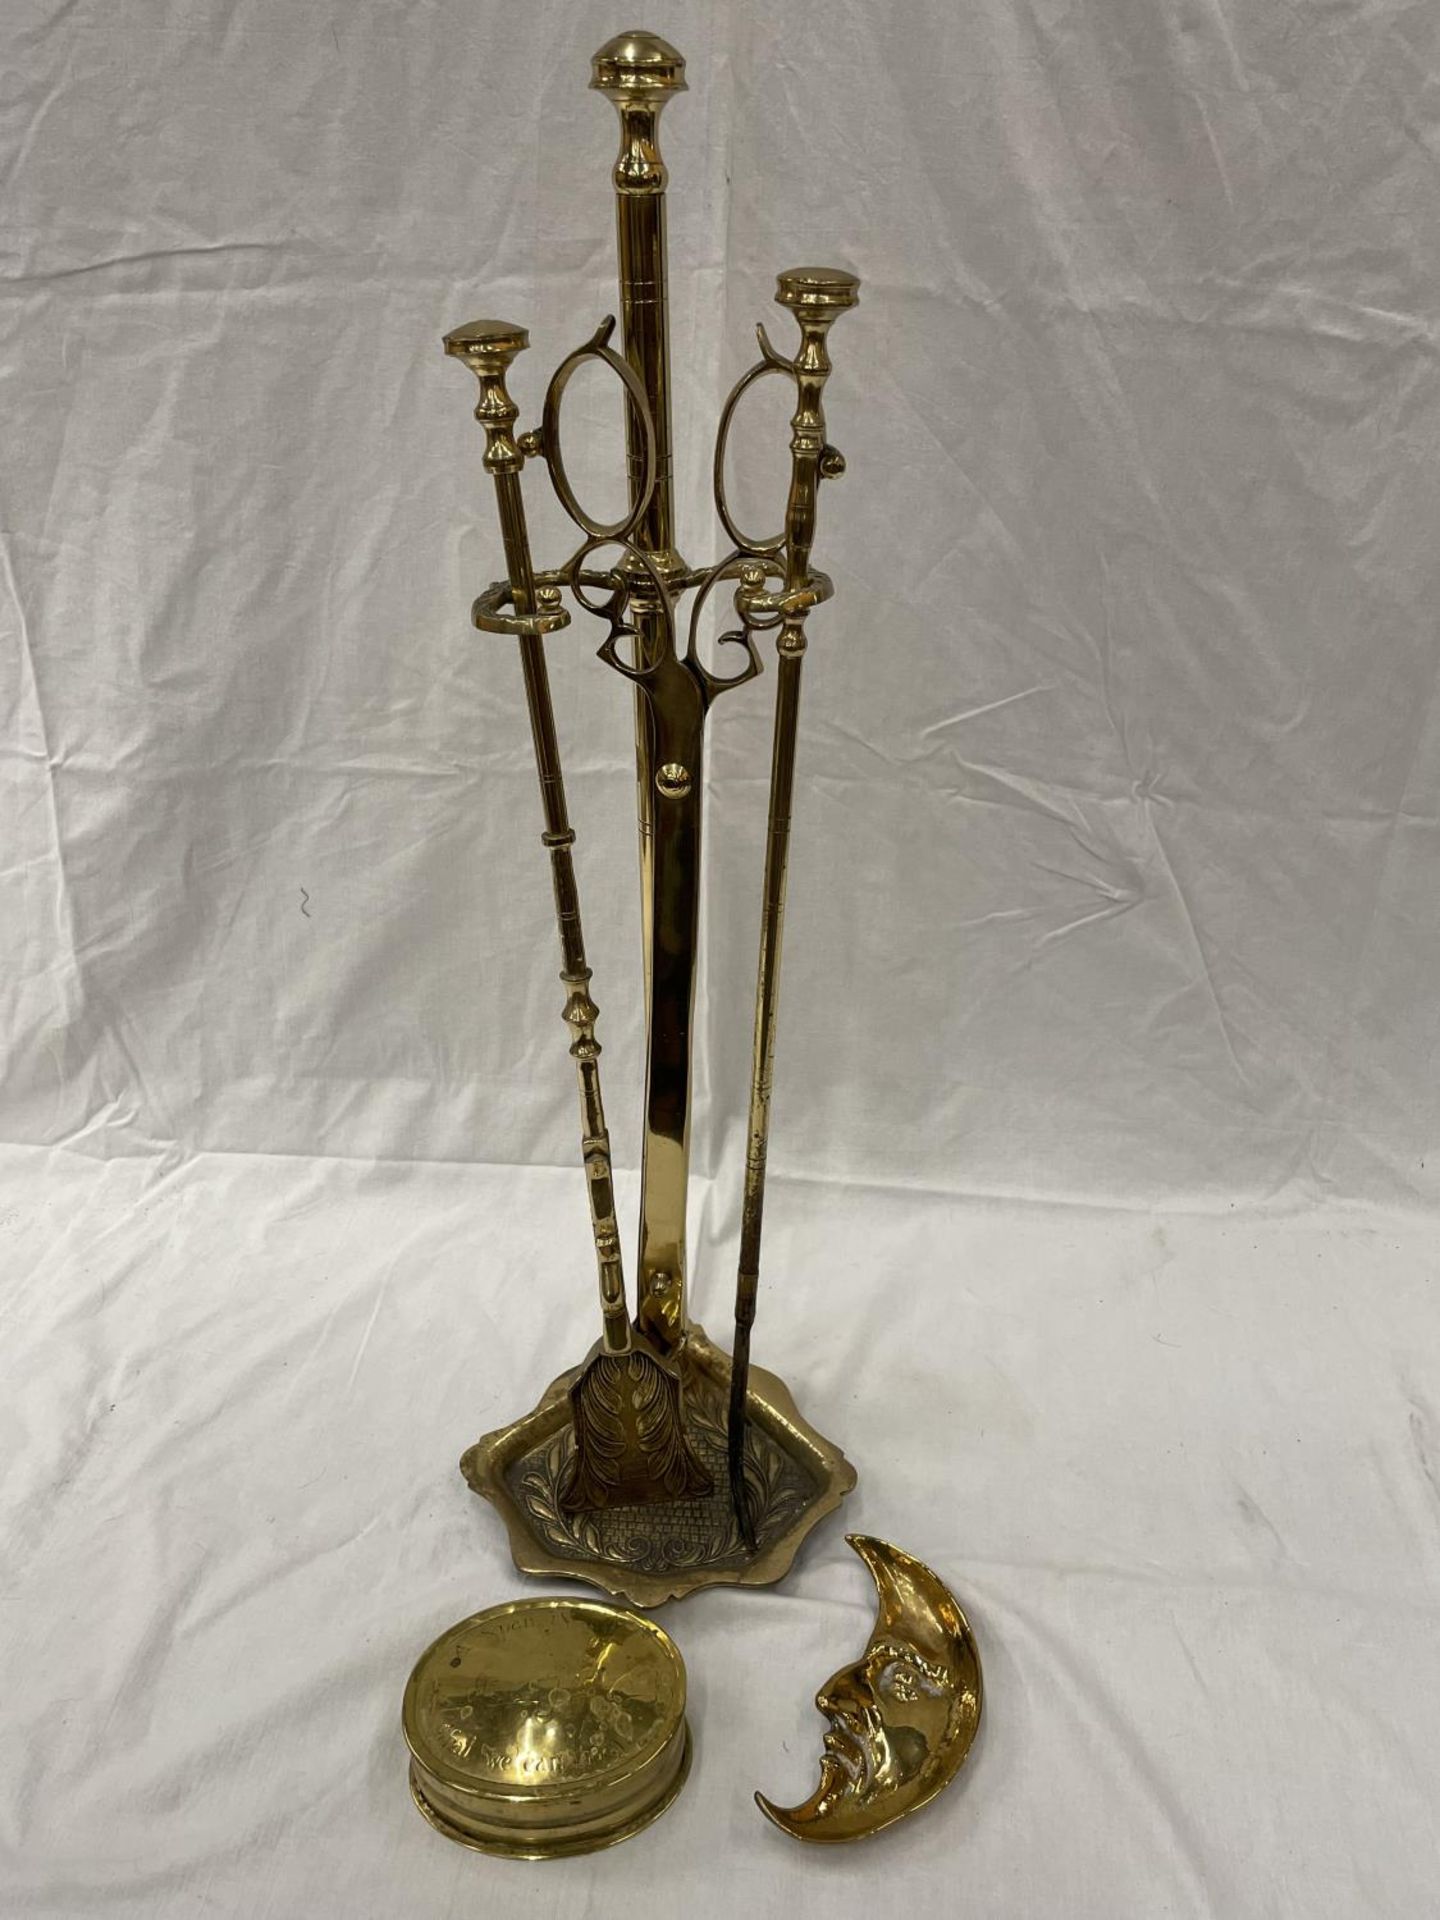 BRASS ITEMS TO INCLUDE A COMPANION SET, LIDDED BOX AND A CRESENT MOON STYLE DISH